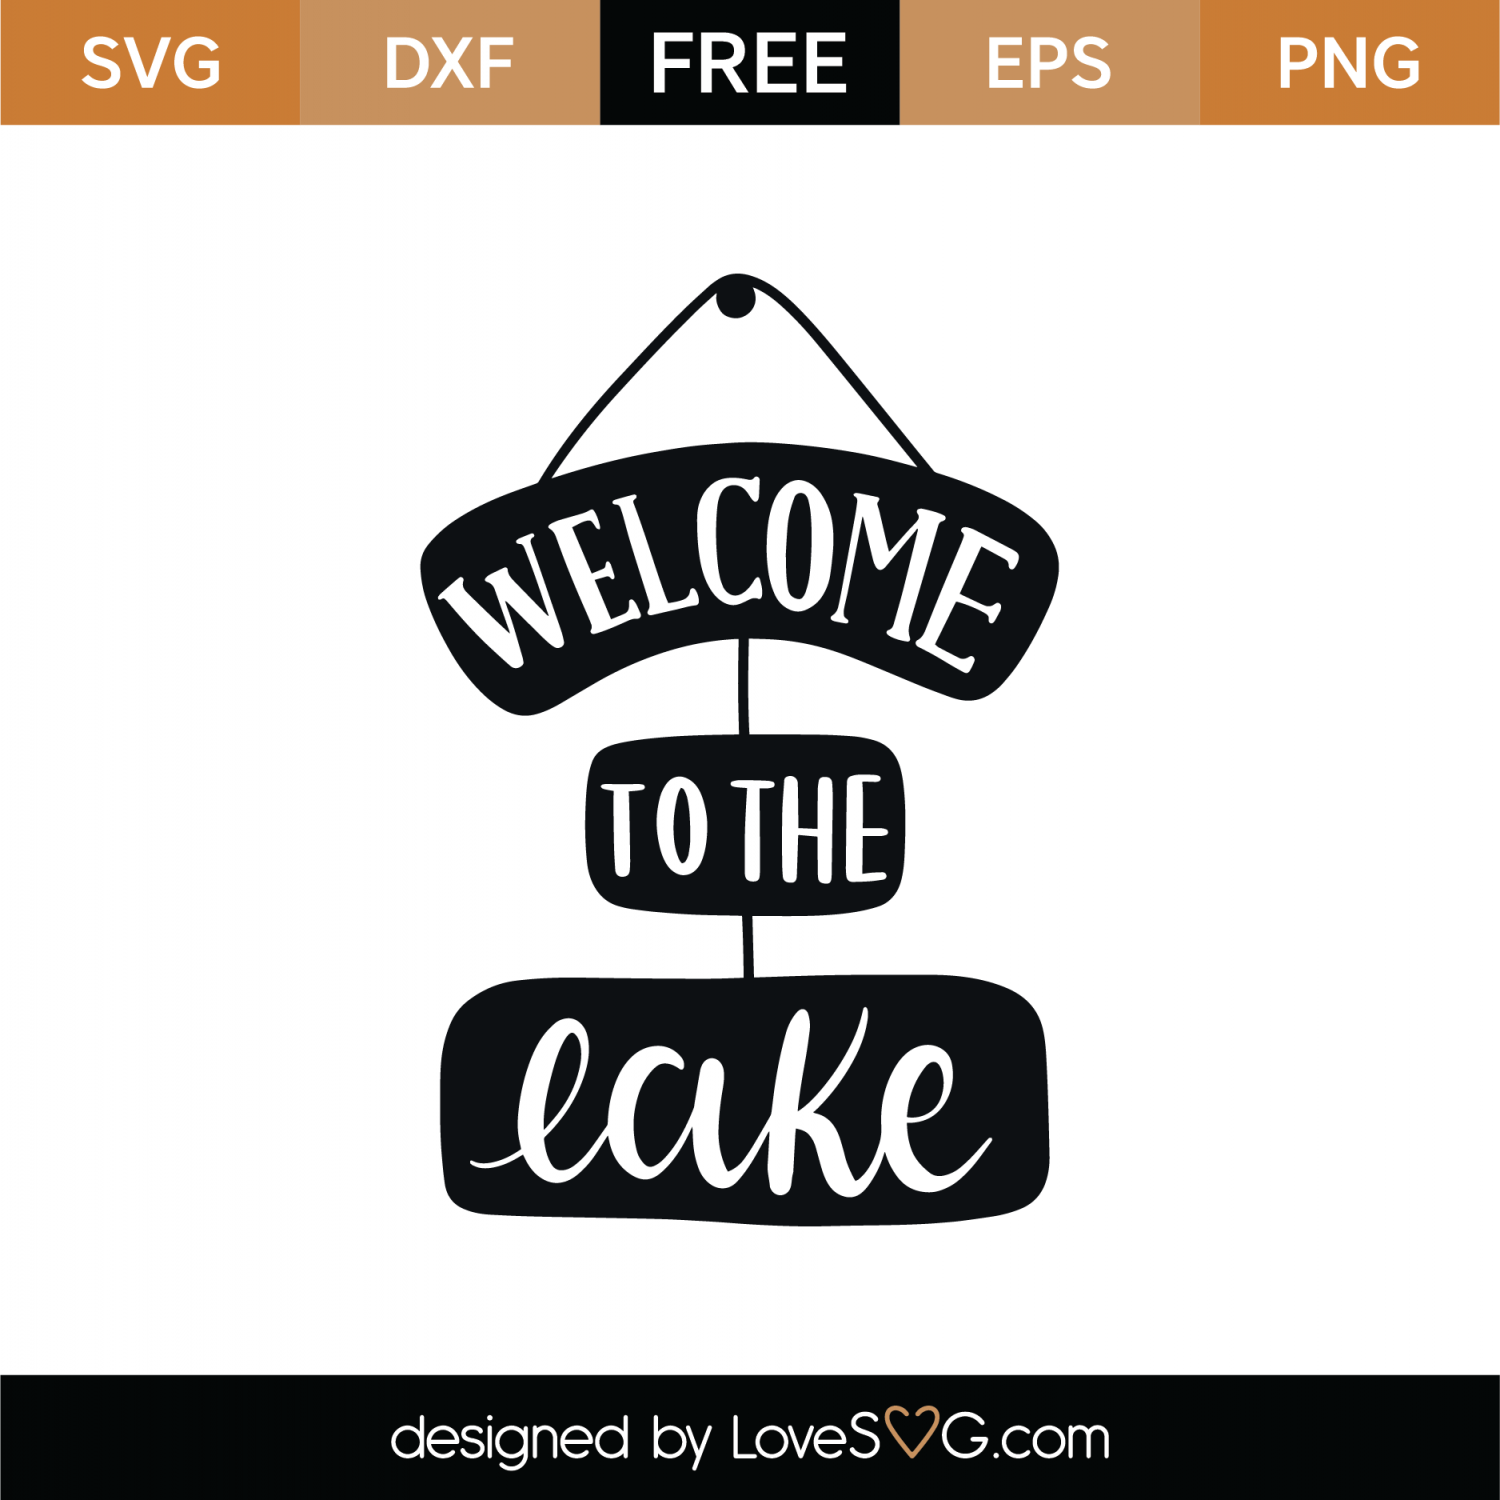 Download Free Welcome To The Lake SVG Cut File | Lovesvg.com